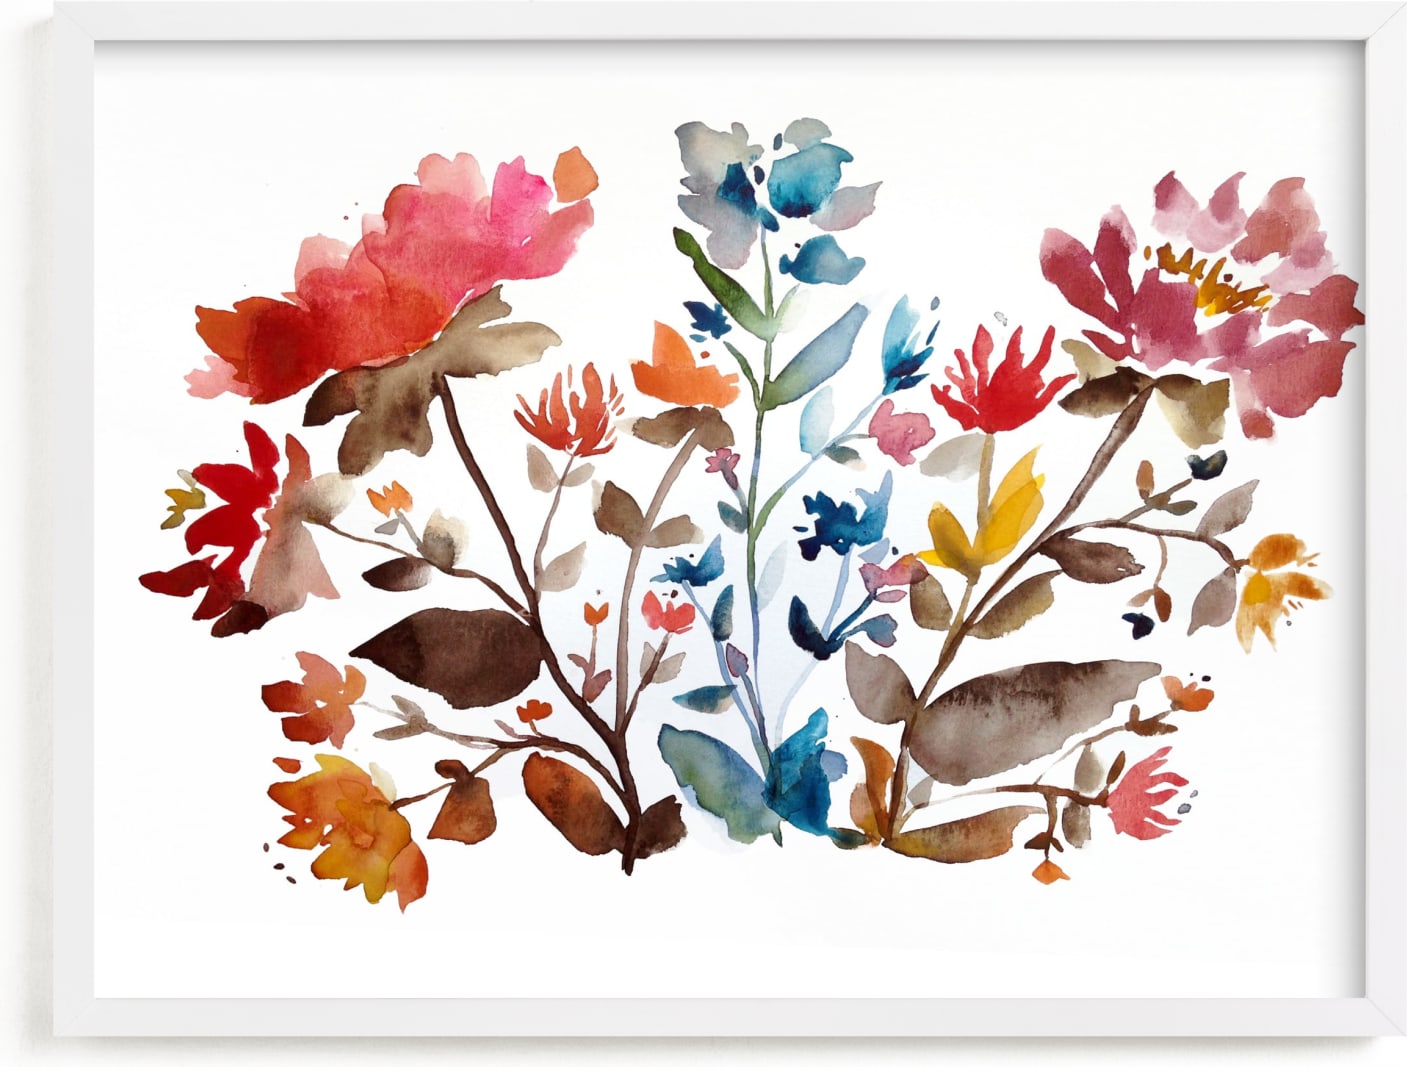 This is a colorful art by Kiana Lee called island wildflowers no.1.